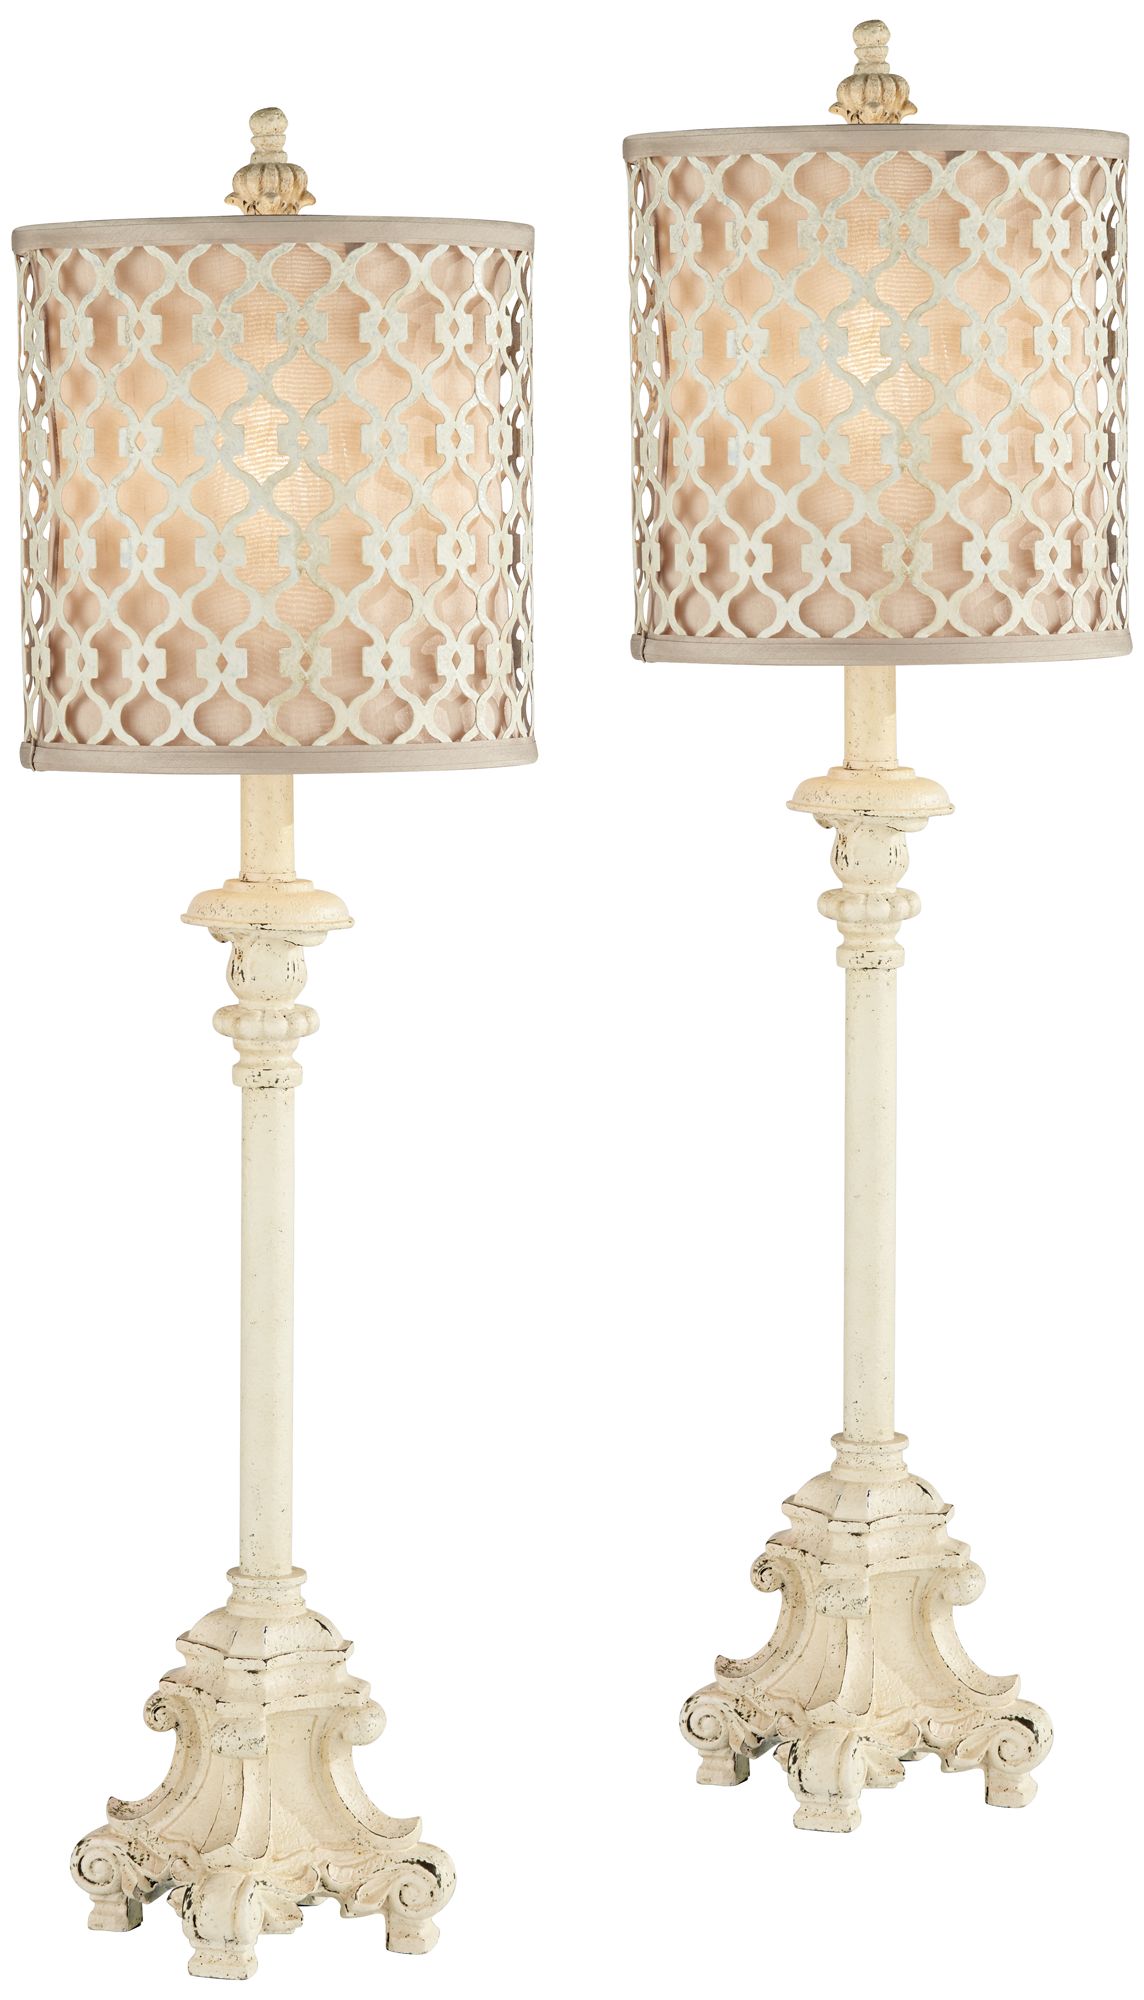 French Candlestick 34" High Ivory White Scroll Buffet Lamps Set of 2